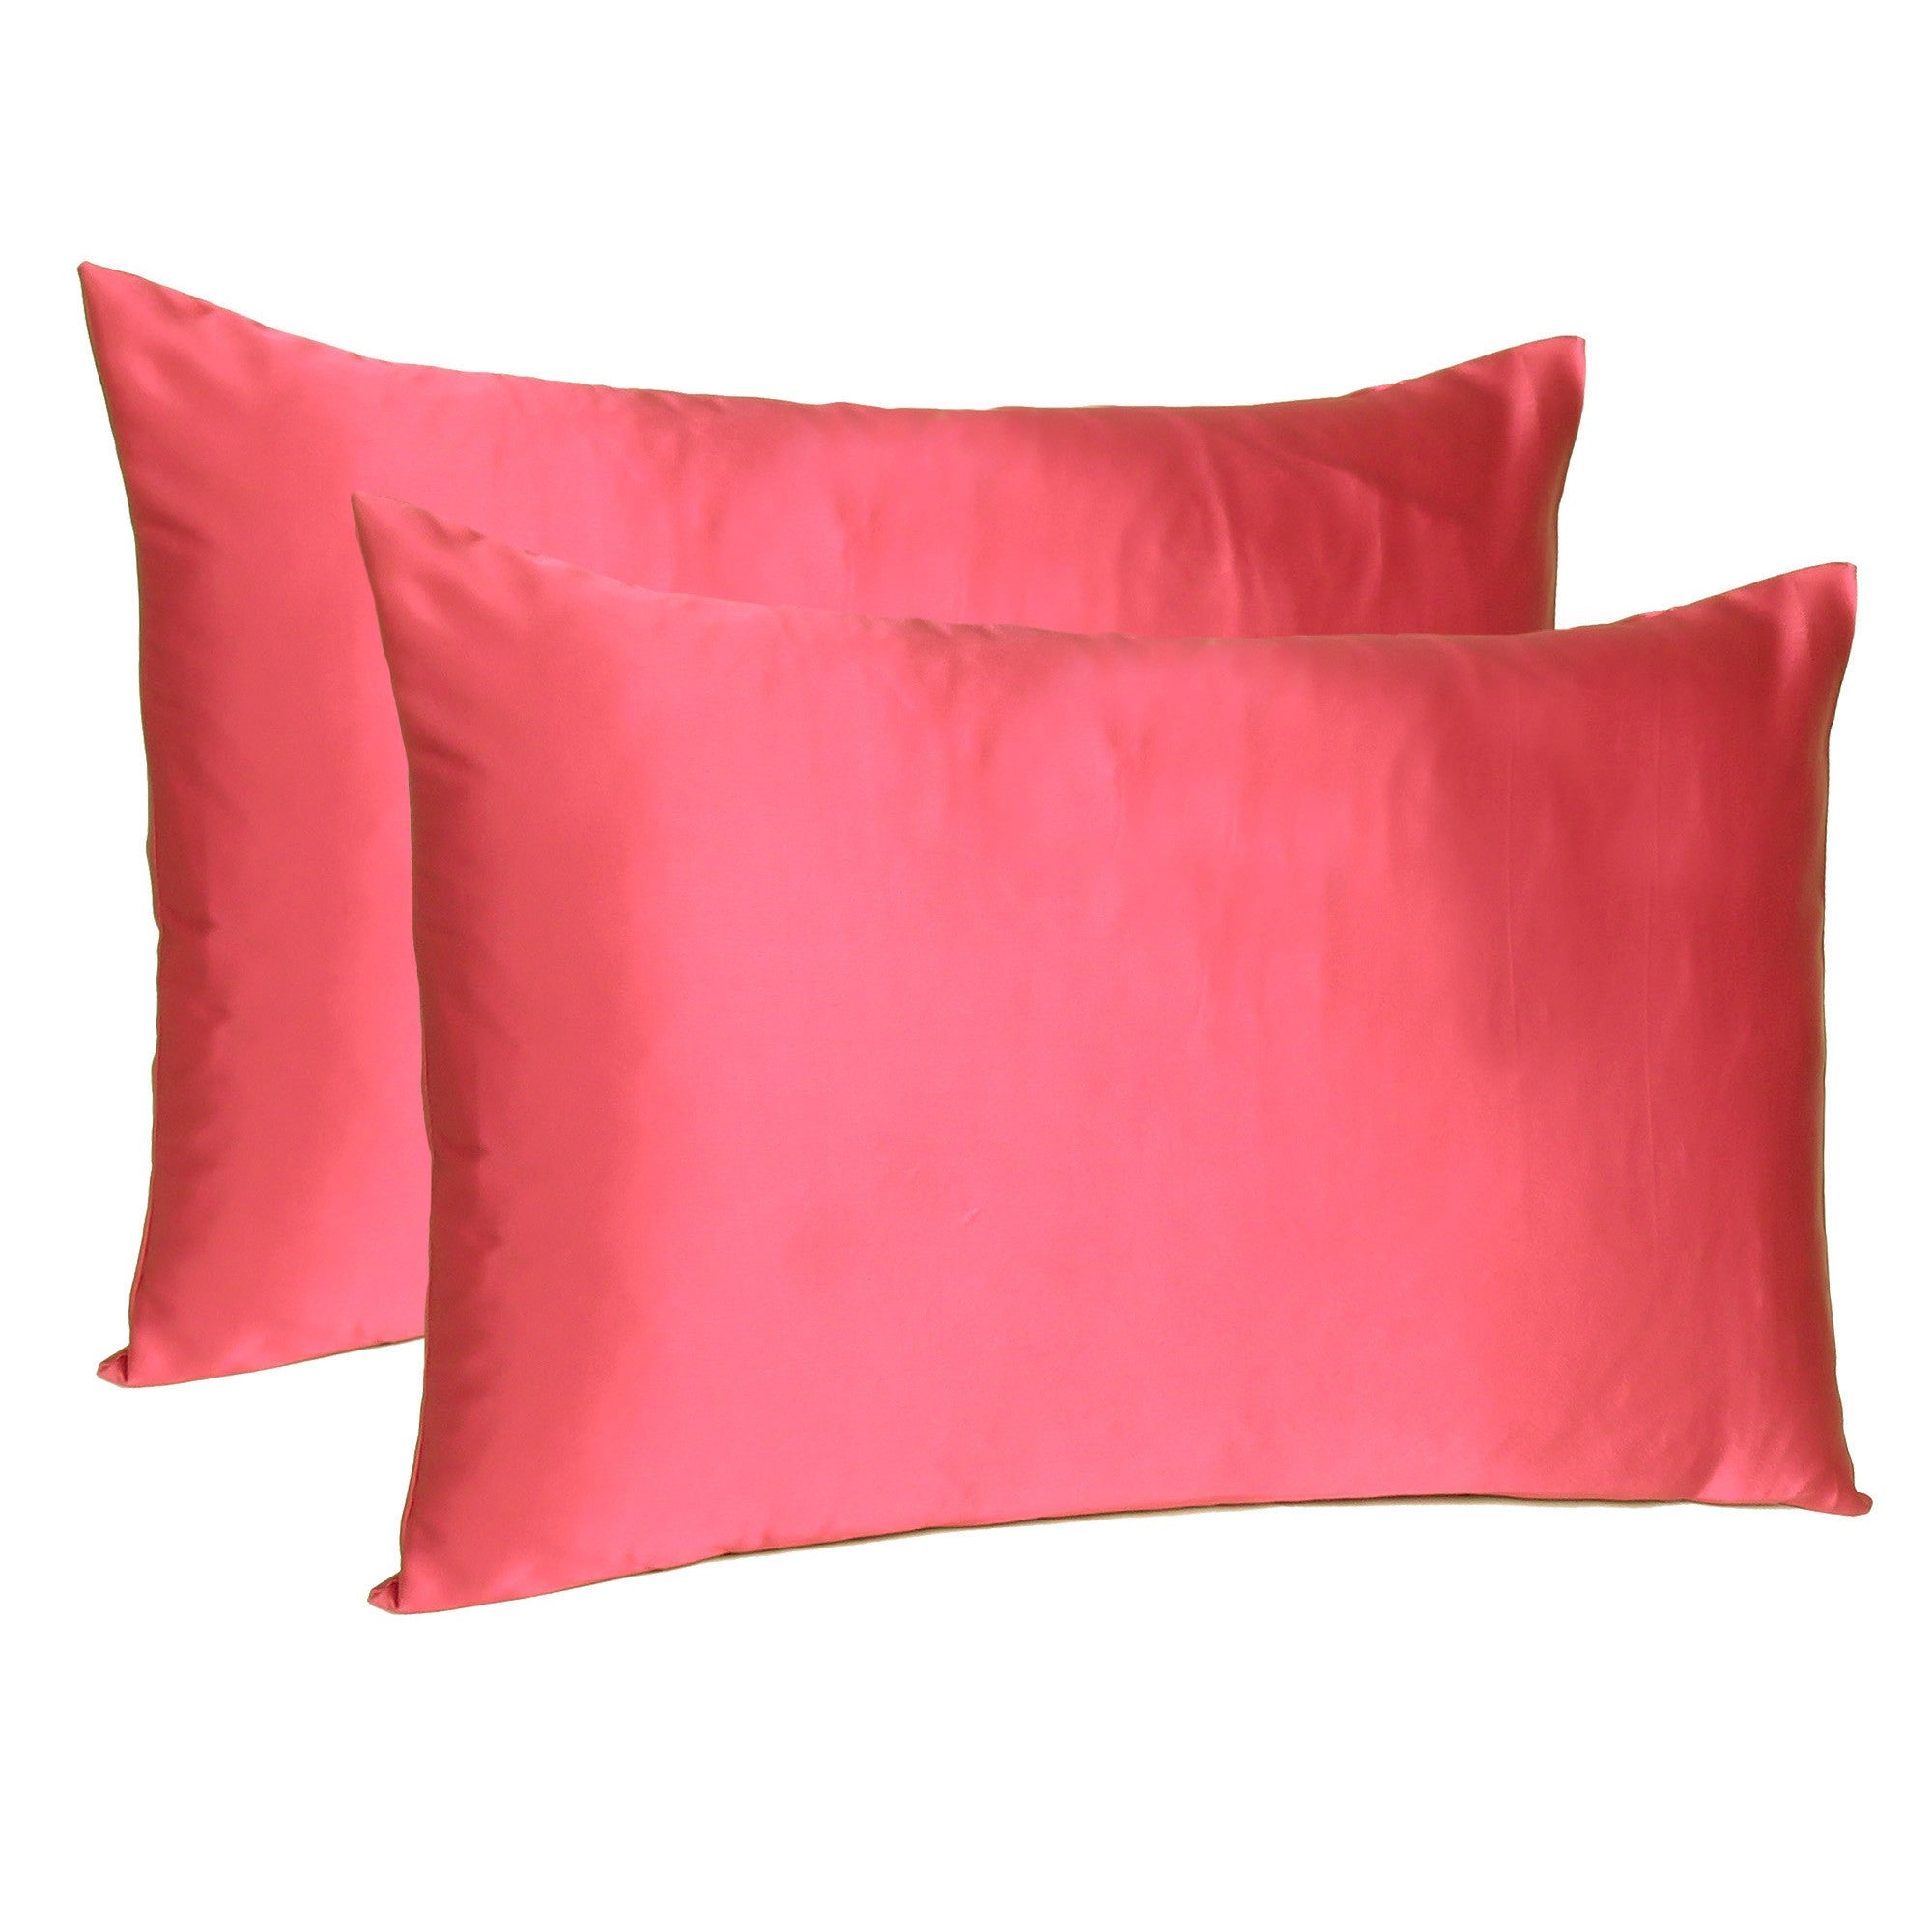 Poppy-Red-Dreamy-Set-Of-2-Silky-Satin-Standard-Pillowcases-Bed-Sheets